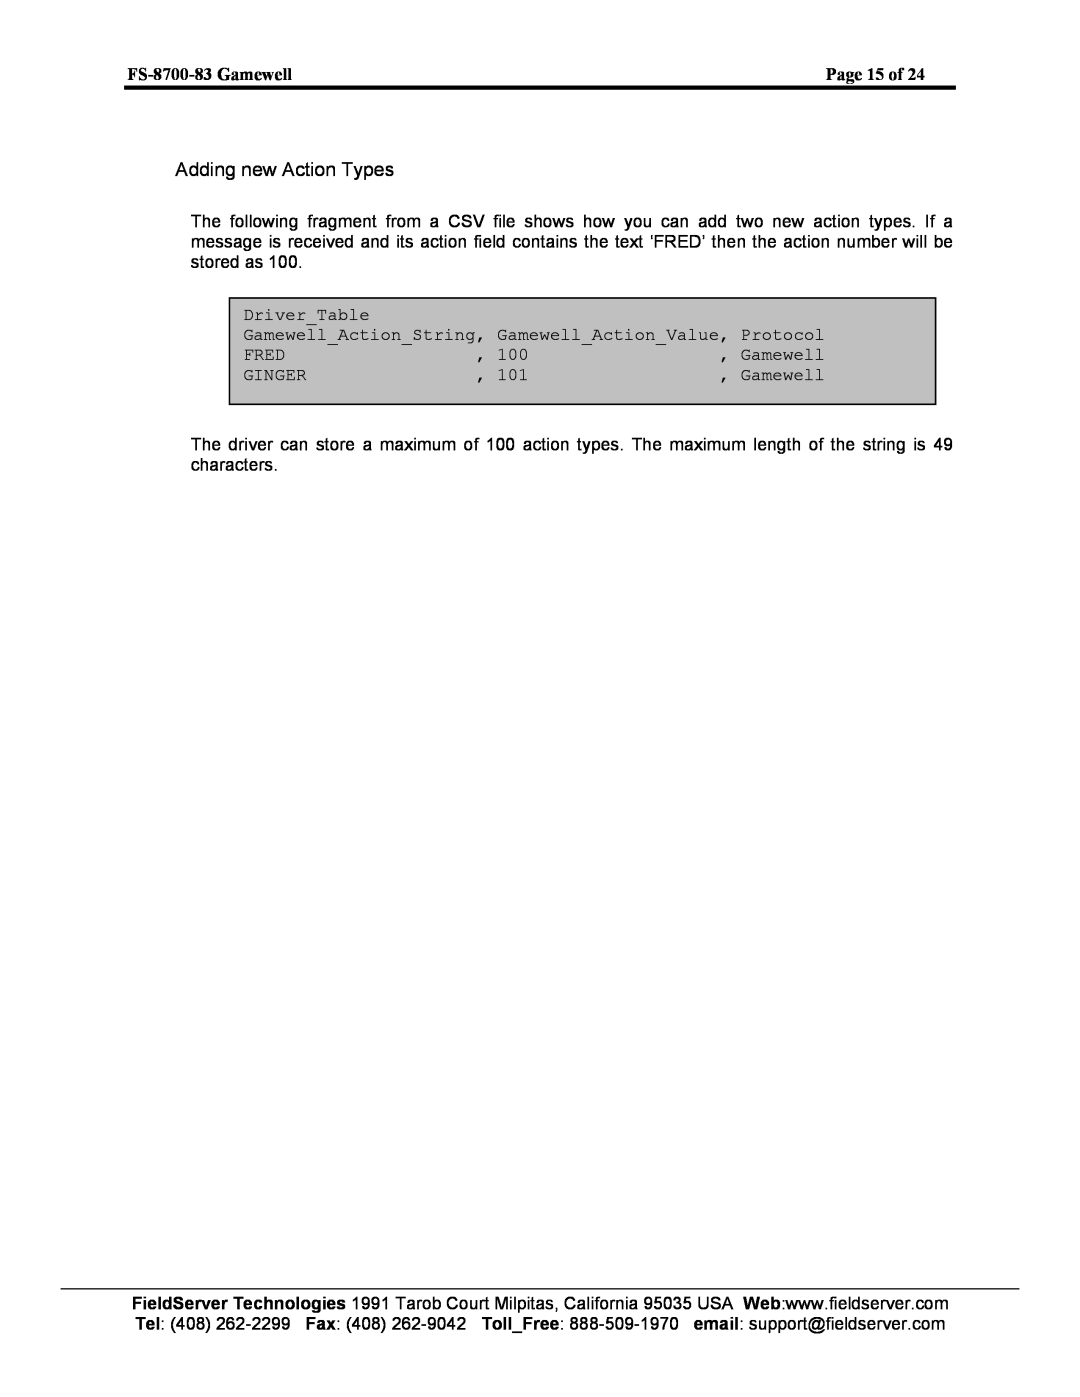 FieldServer instruction manual Adding new Action Types, FS-8700-83 Gamewell, Page 15 of 